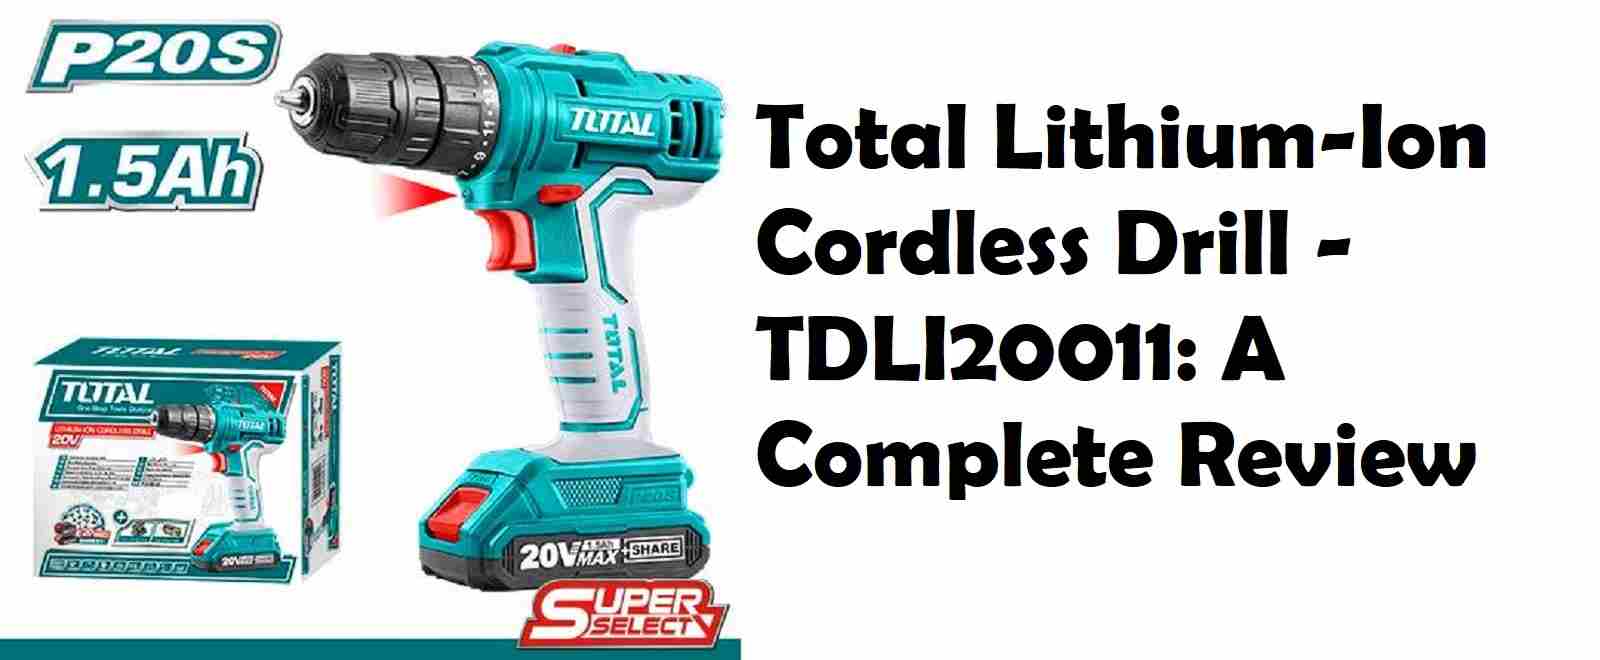 Total Lithium-Ion Cordless Drill - TDLI20011 Review